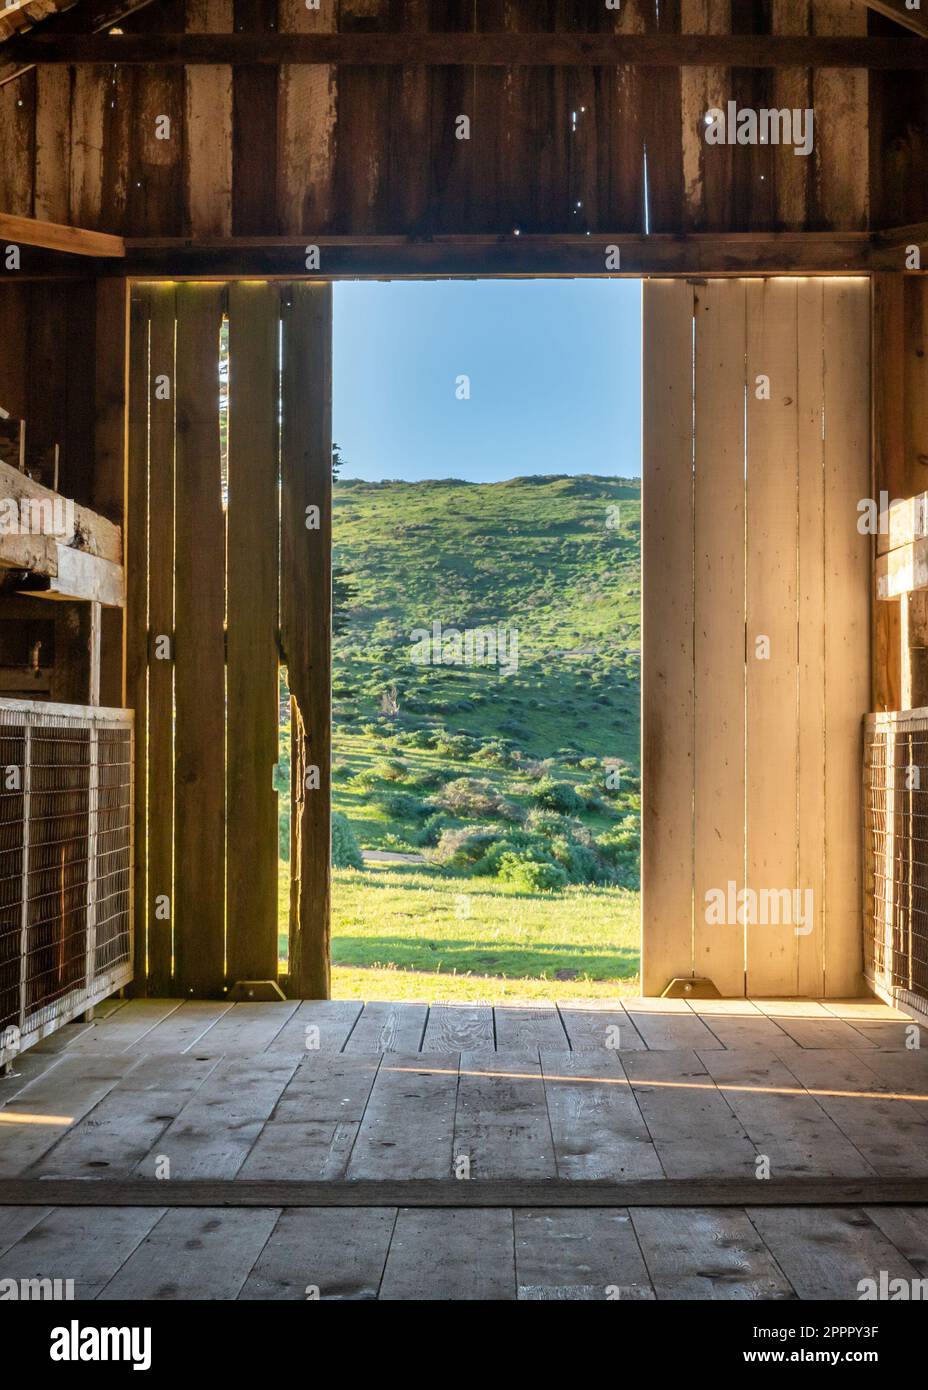 View of green landscape from inside doorway of rustic barn Stock Photo